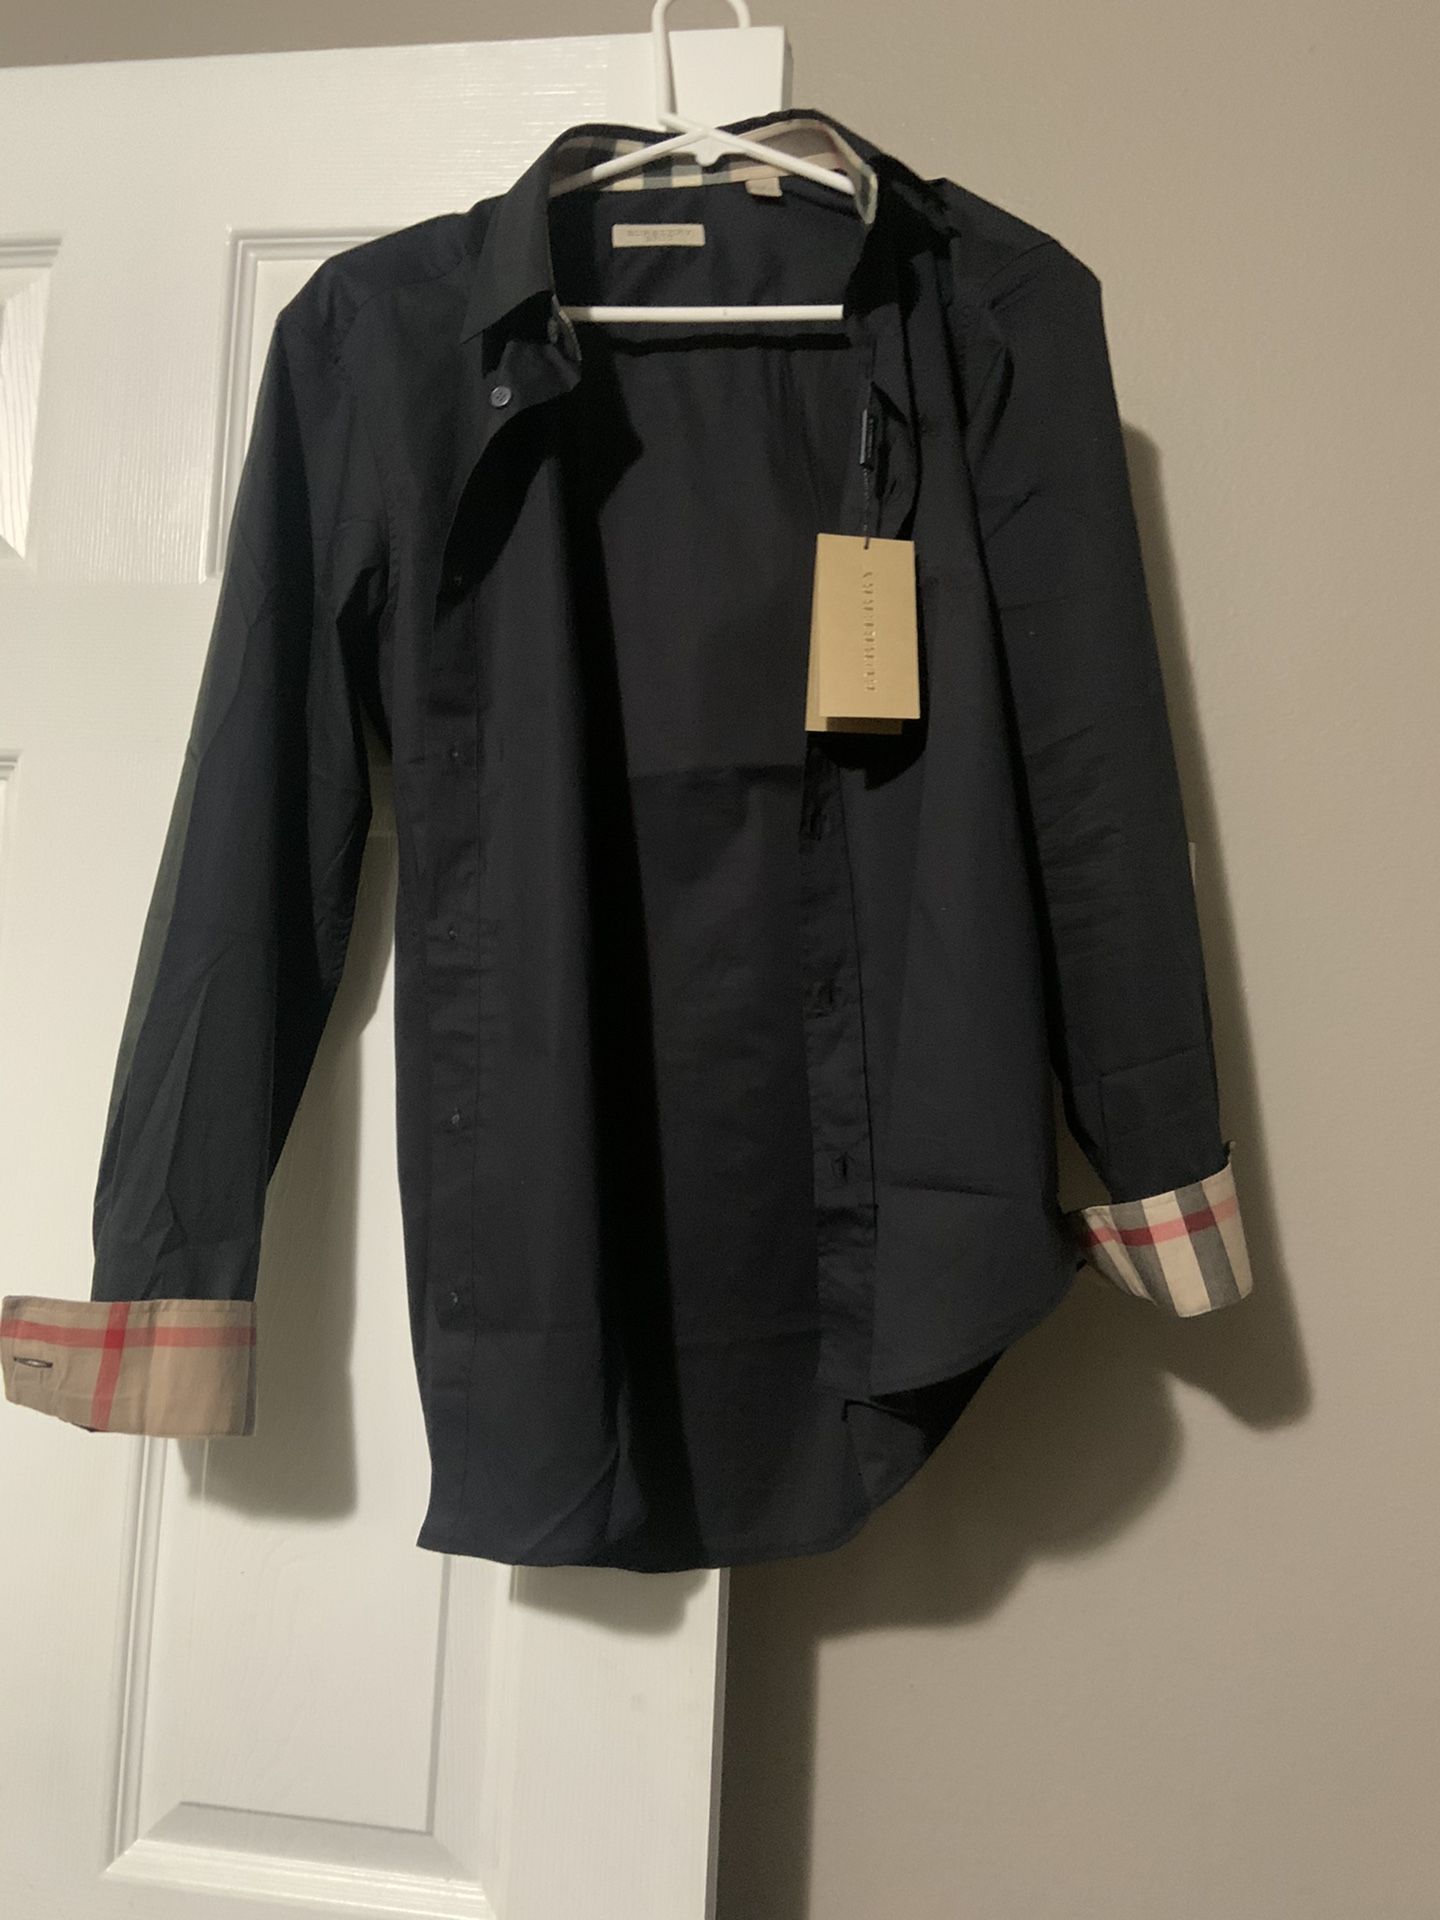 BURBERRY MENS BUTTON DOWN SHIRT SIZE SMALL